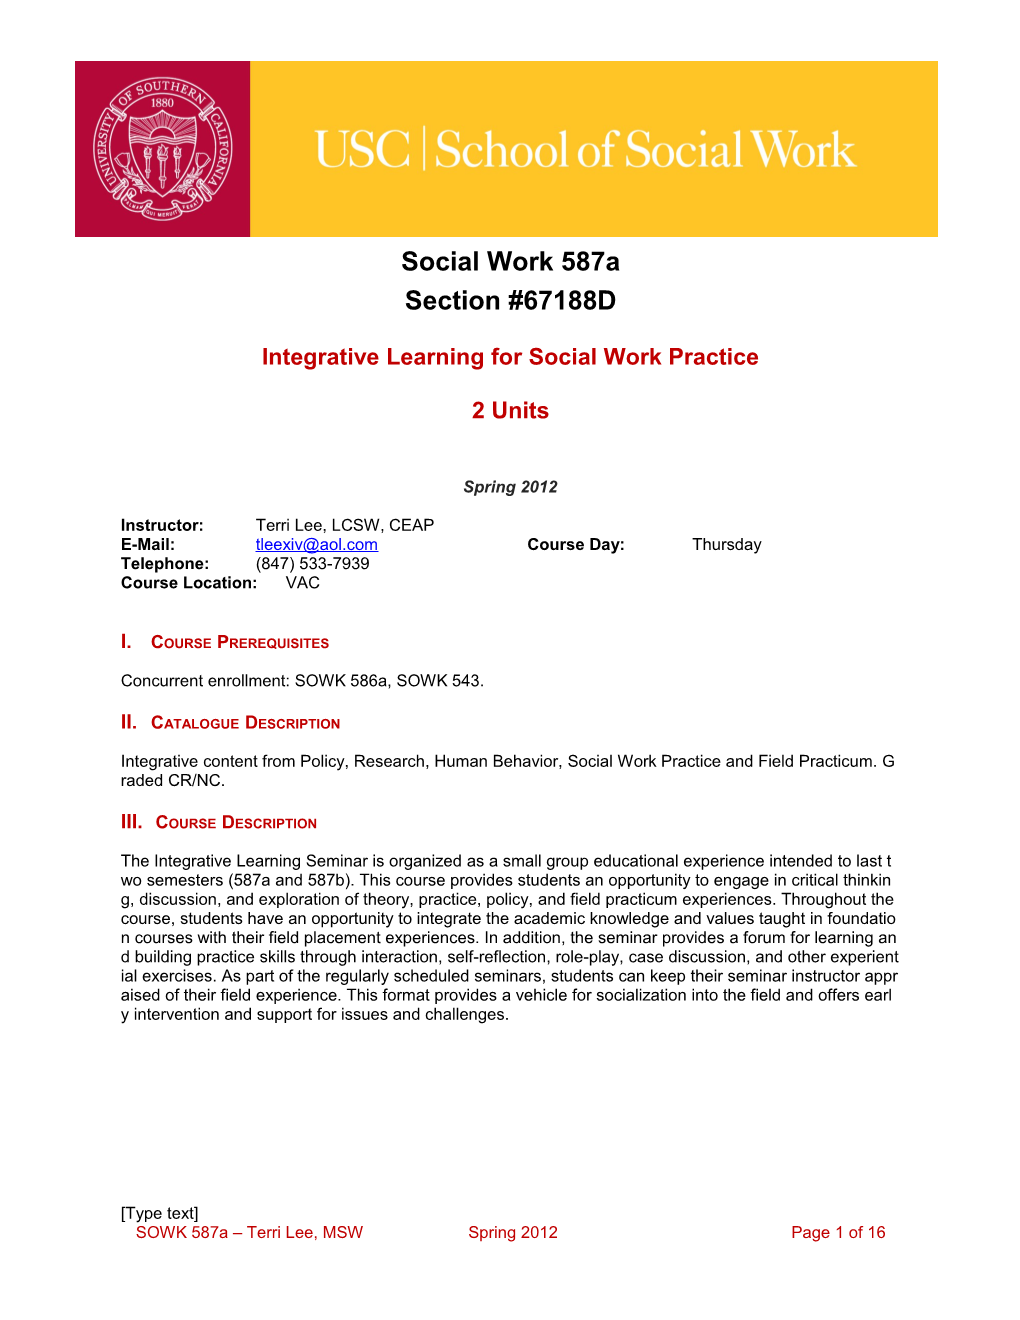 School of Social Work Syllabus Template Guide s5